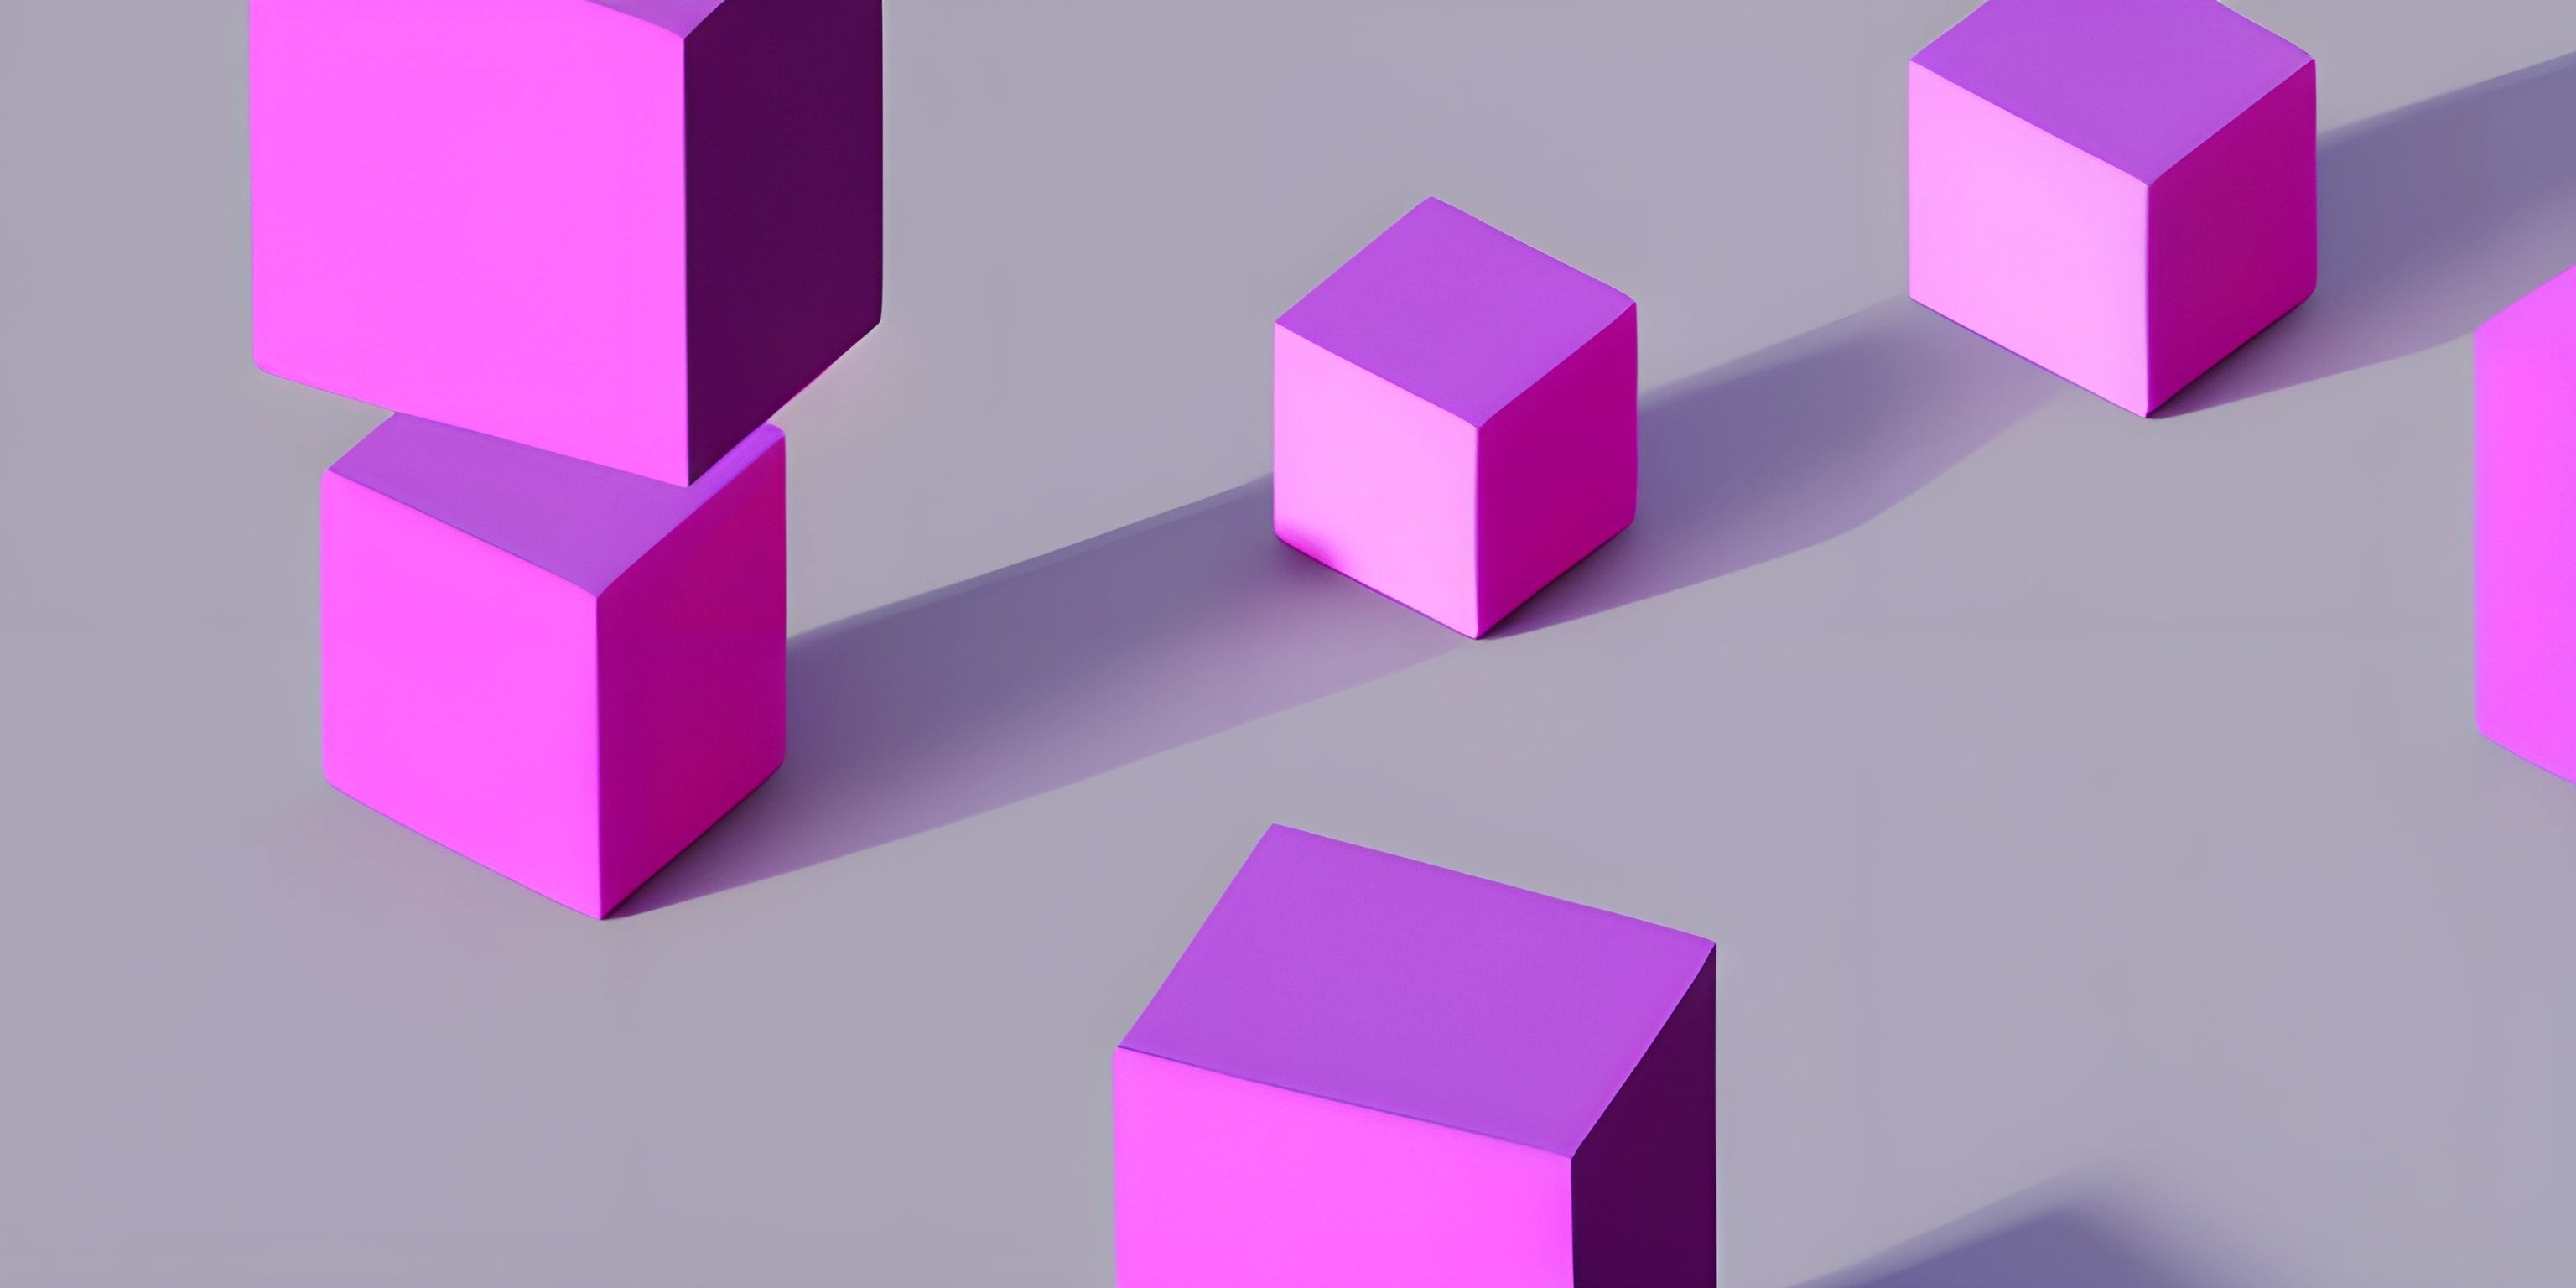 three large pink cubes surrounded by smaller purple cubes on grey surface with white background